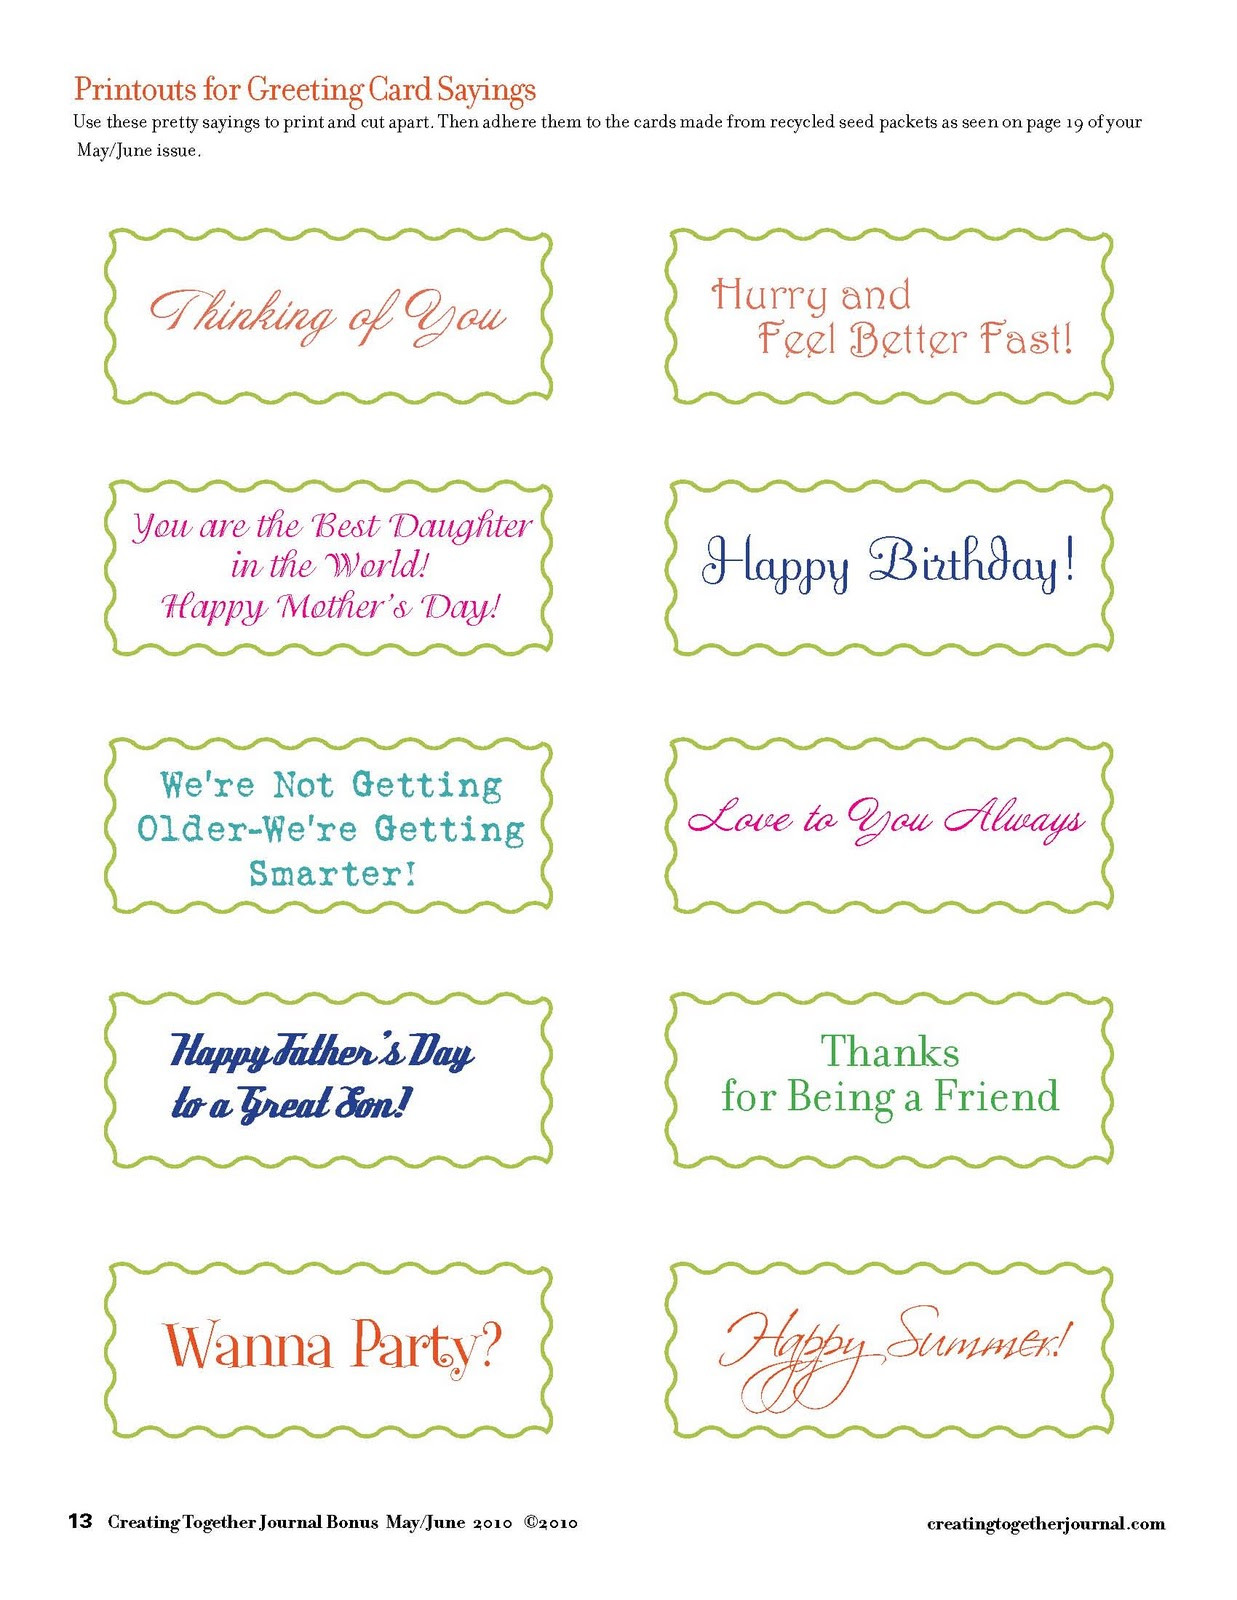 Sayings For Birthday Cards
 Creating To her Journal Printouts for Greeting Card Sayings